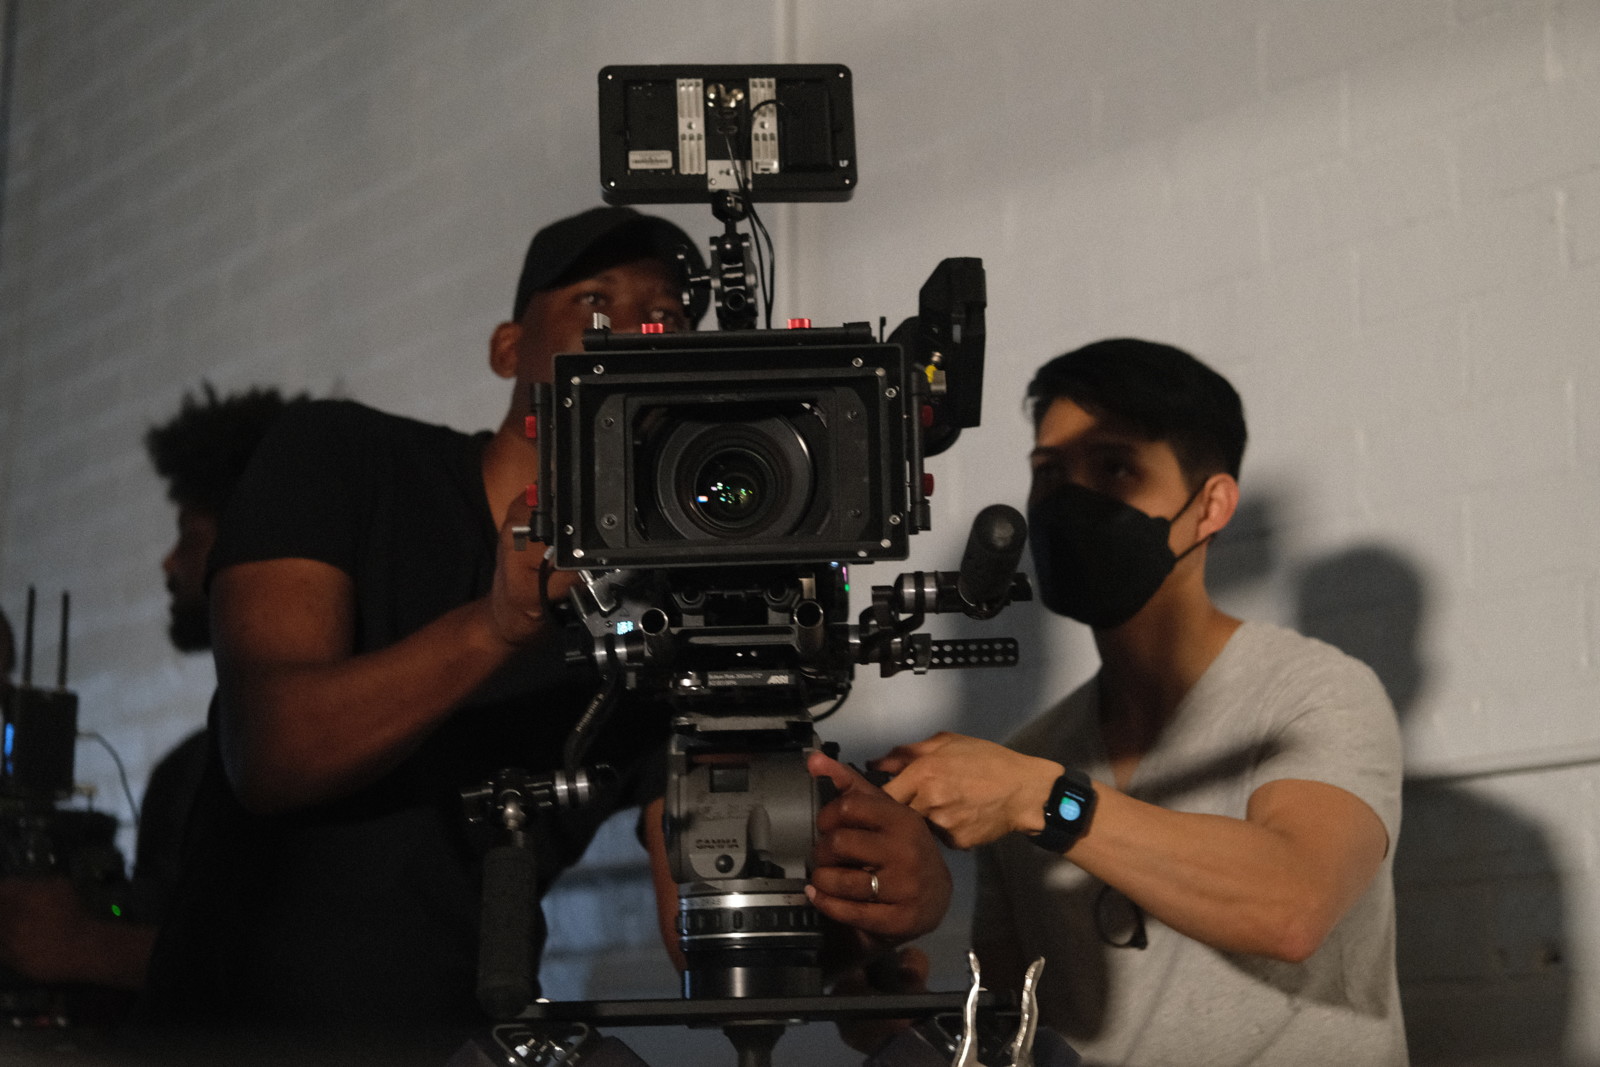 What makes a good producer Closeup of Joshua wearing a black cap and another male crew member wearing a black mask using a video camera